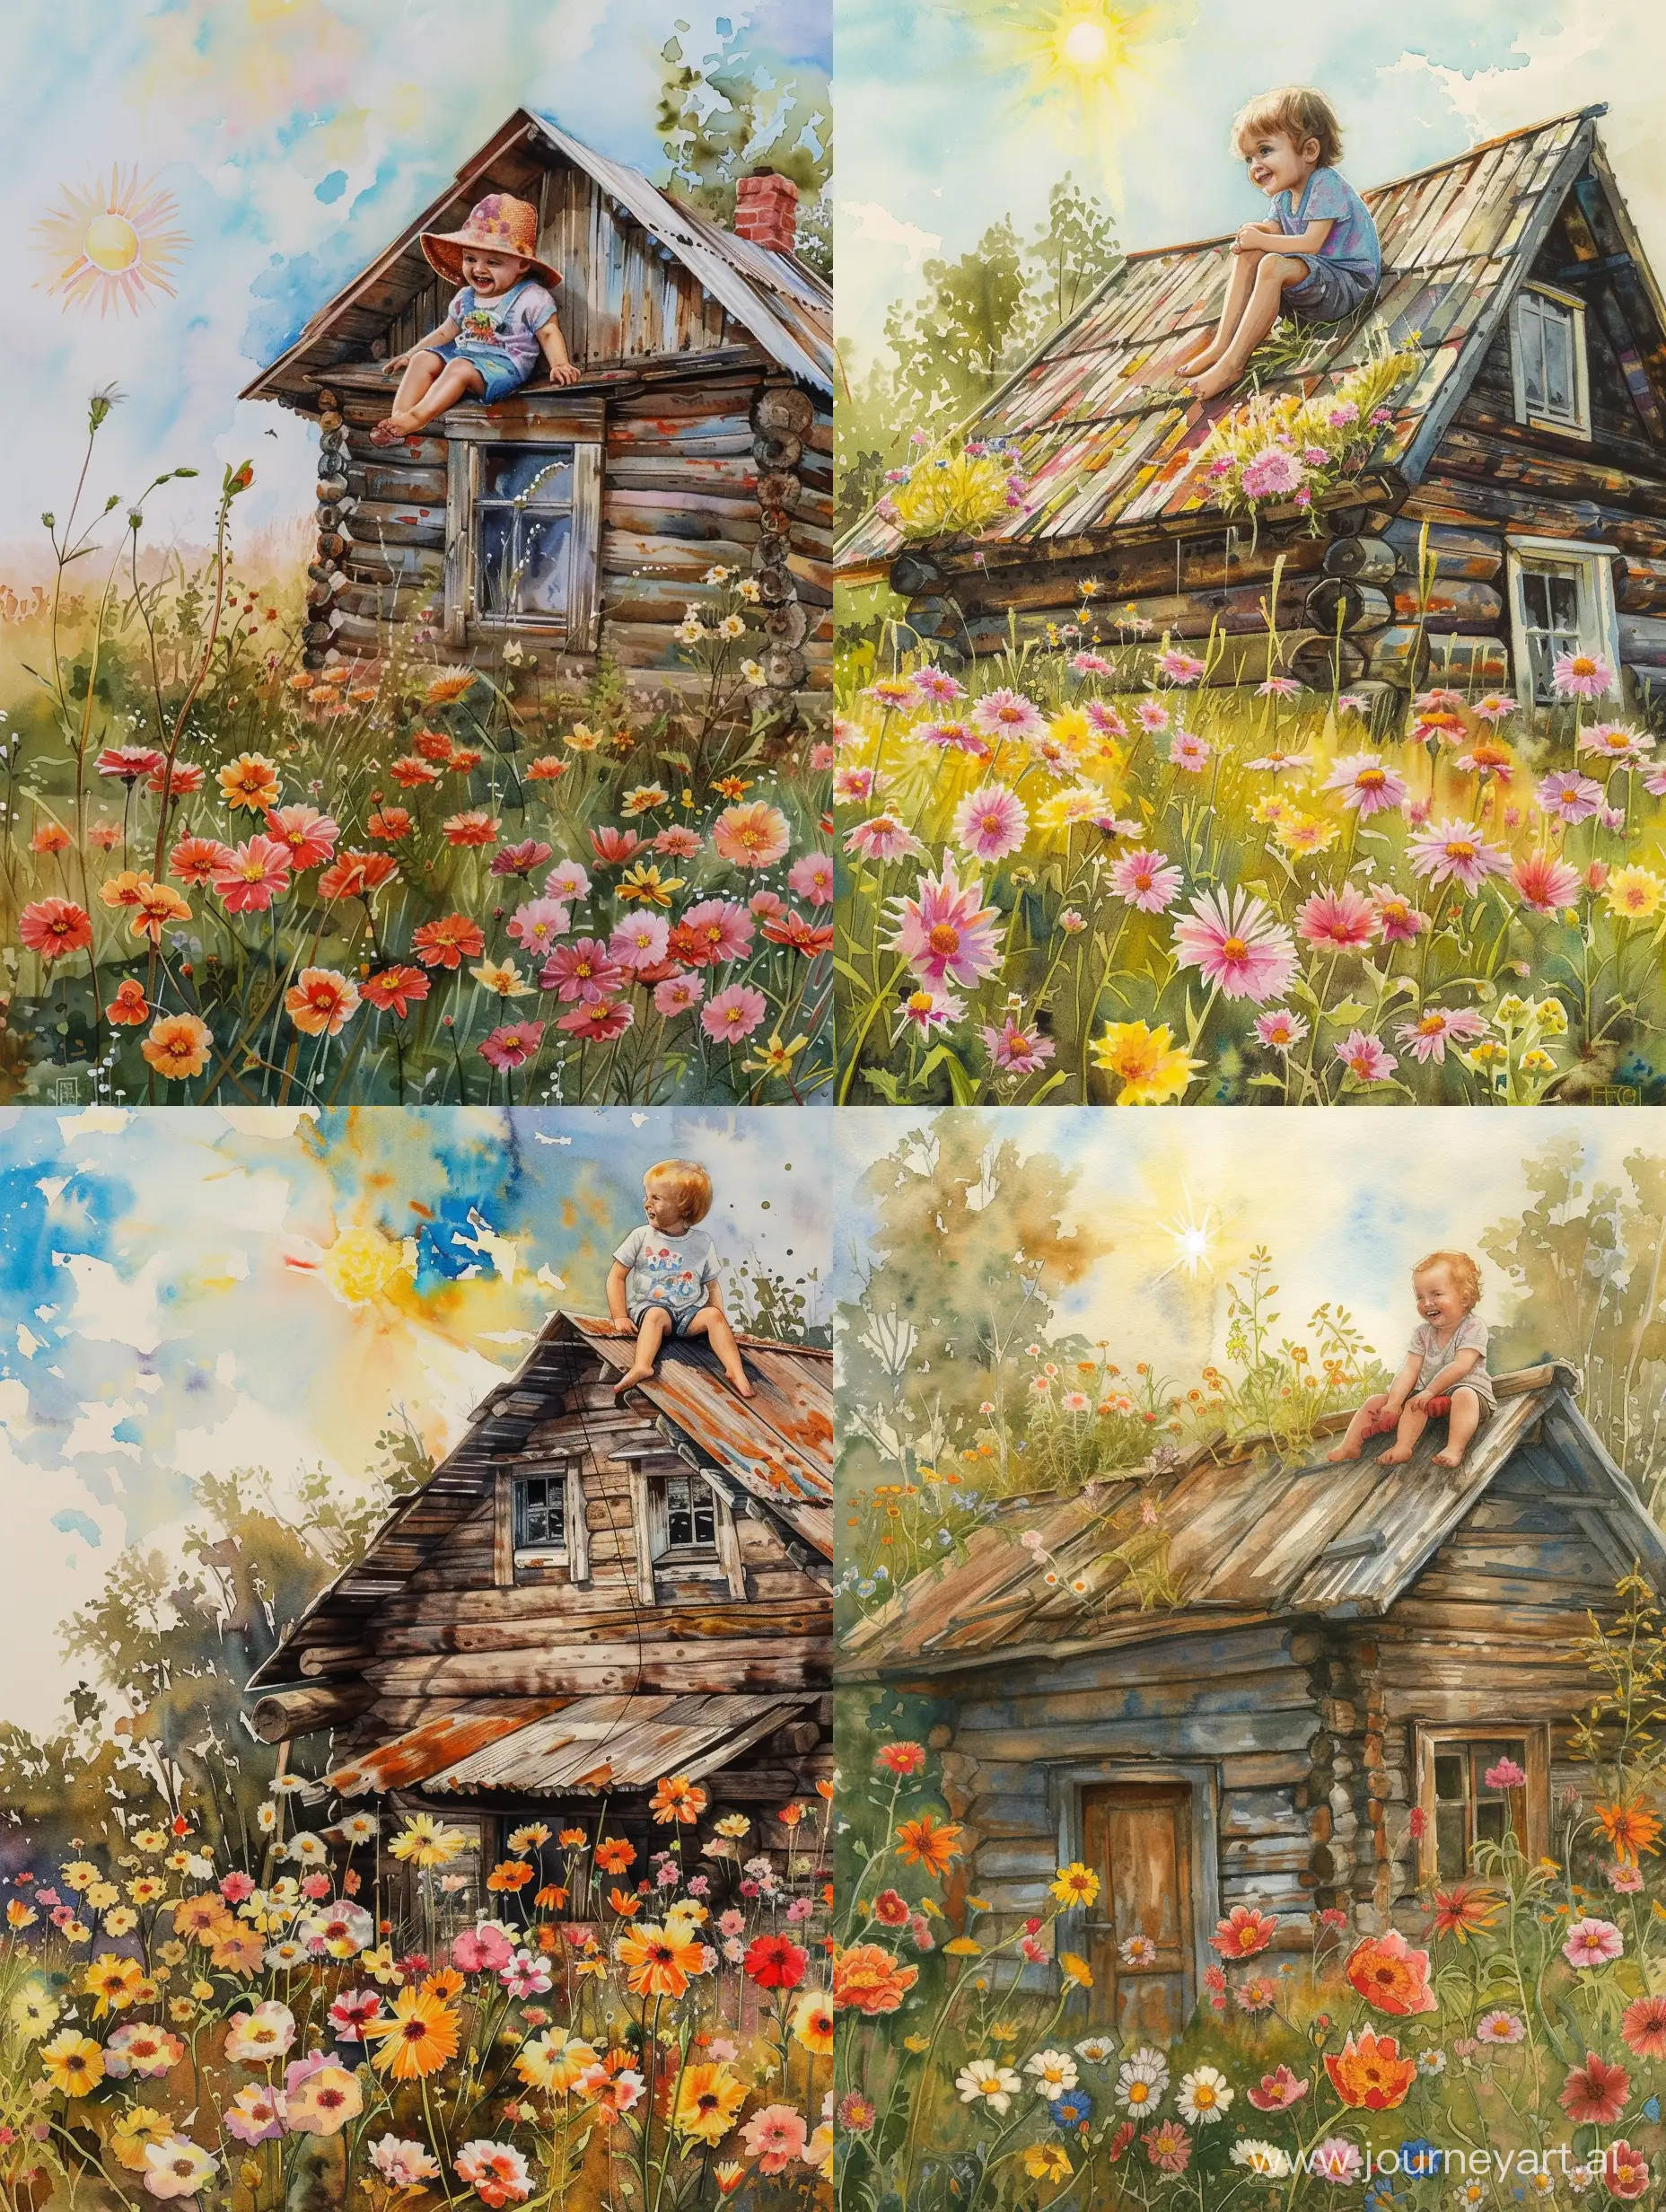 Child-Admiring-Sun-from-Old-Wooden-House-in-Vibrant-Russian-Village-Meadow